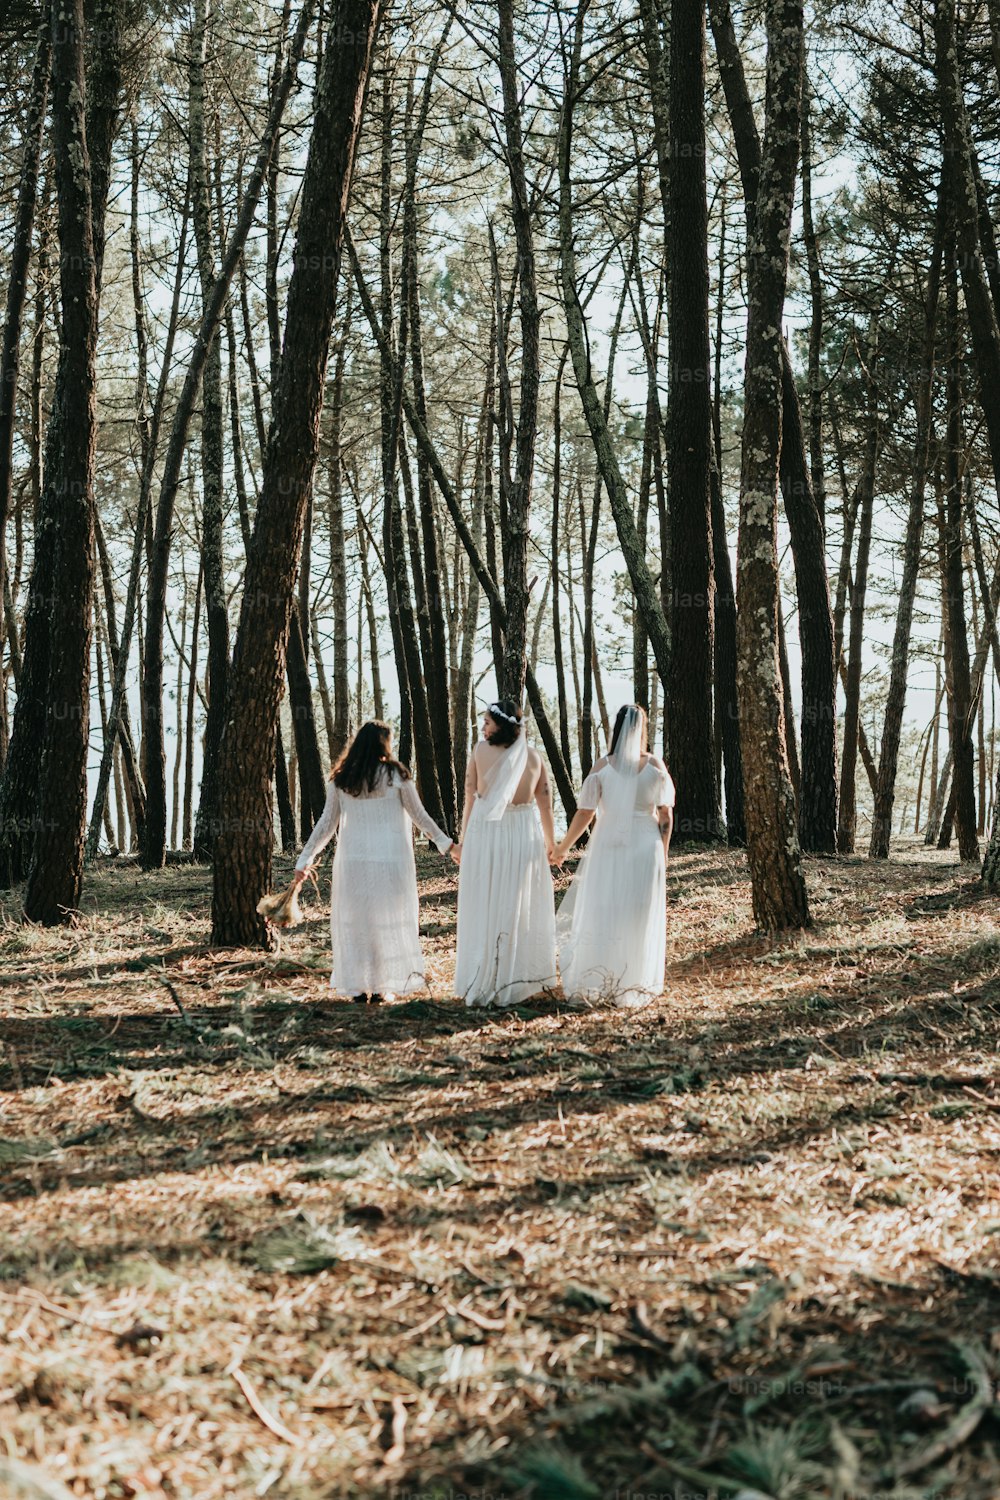 a group of women in white dresses walking through a forest